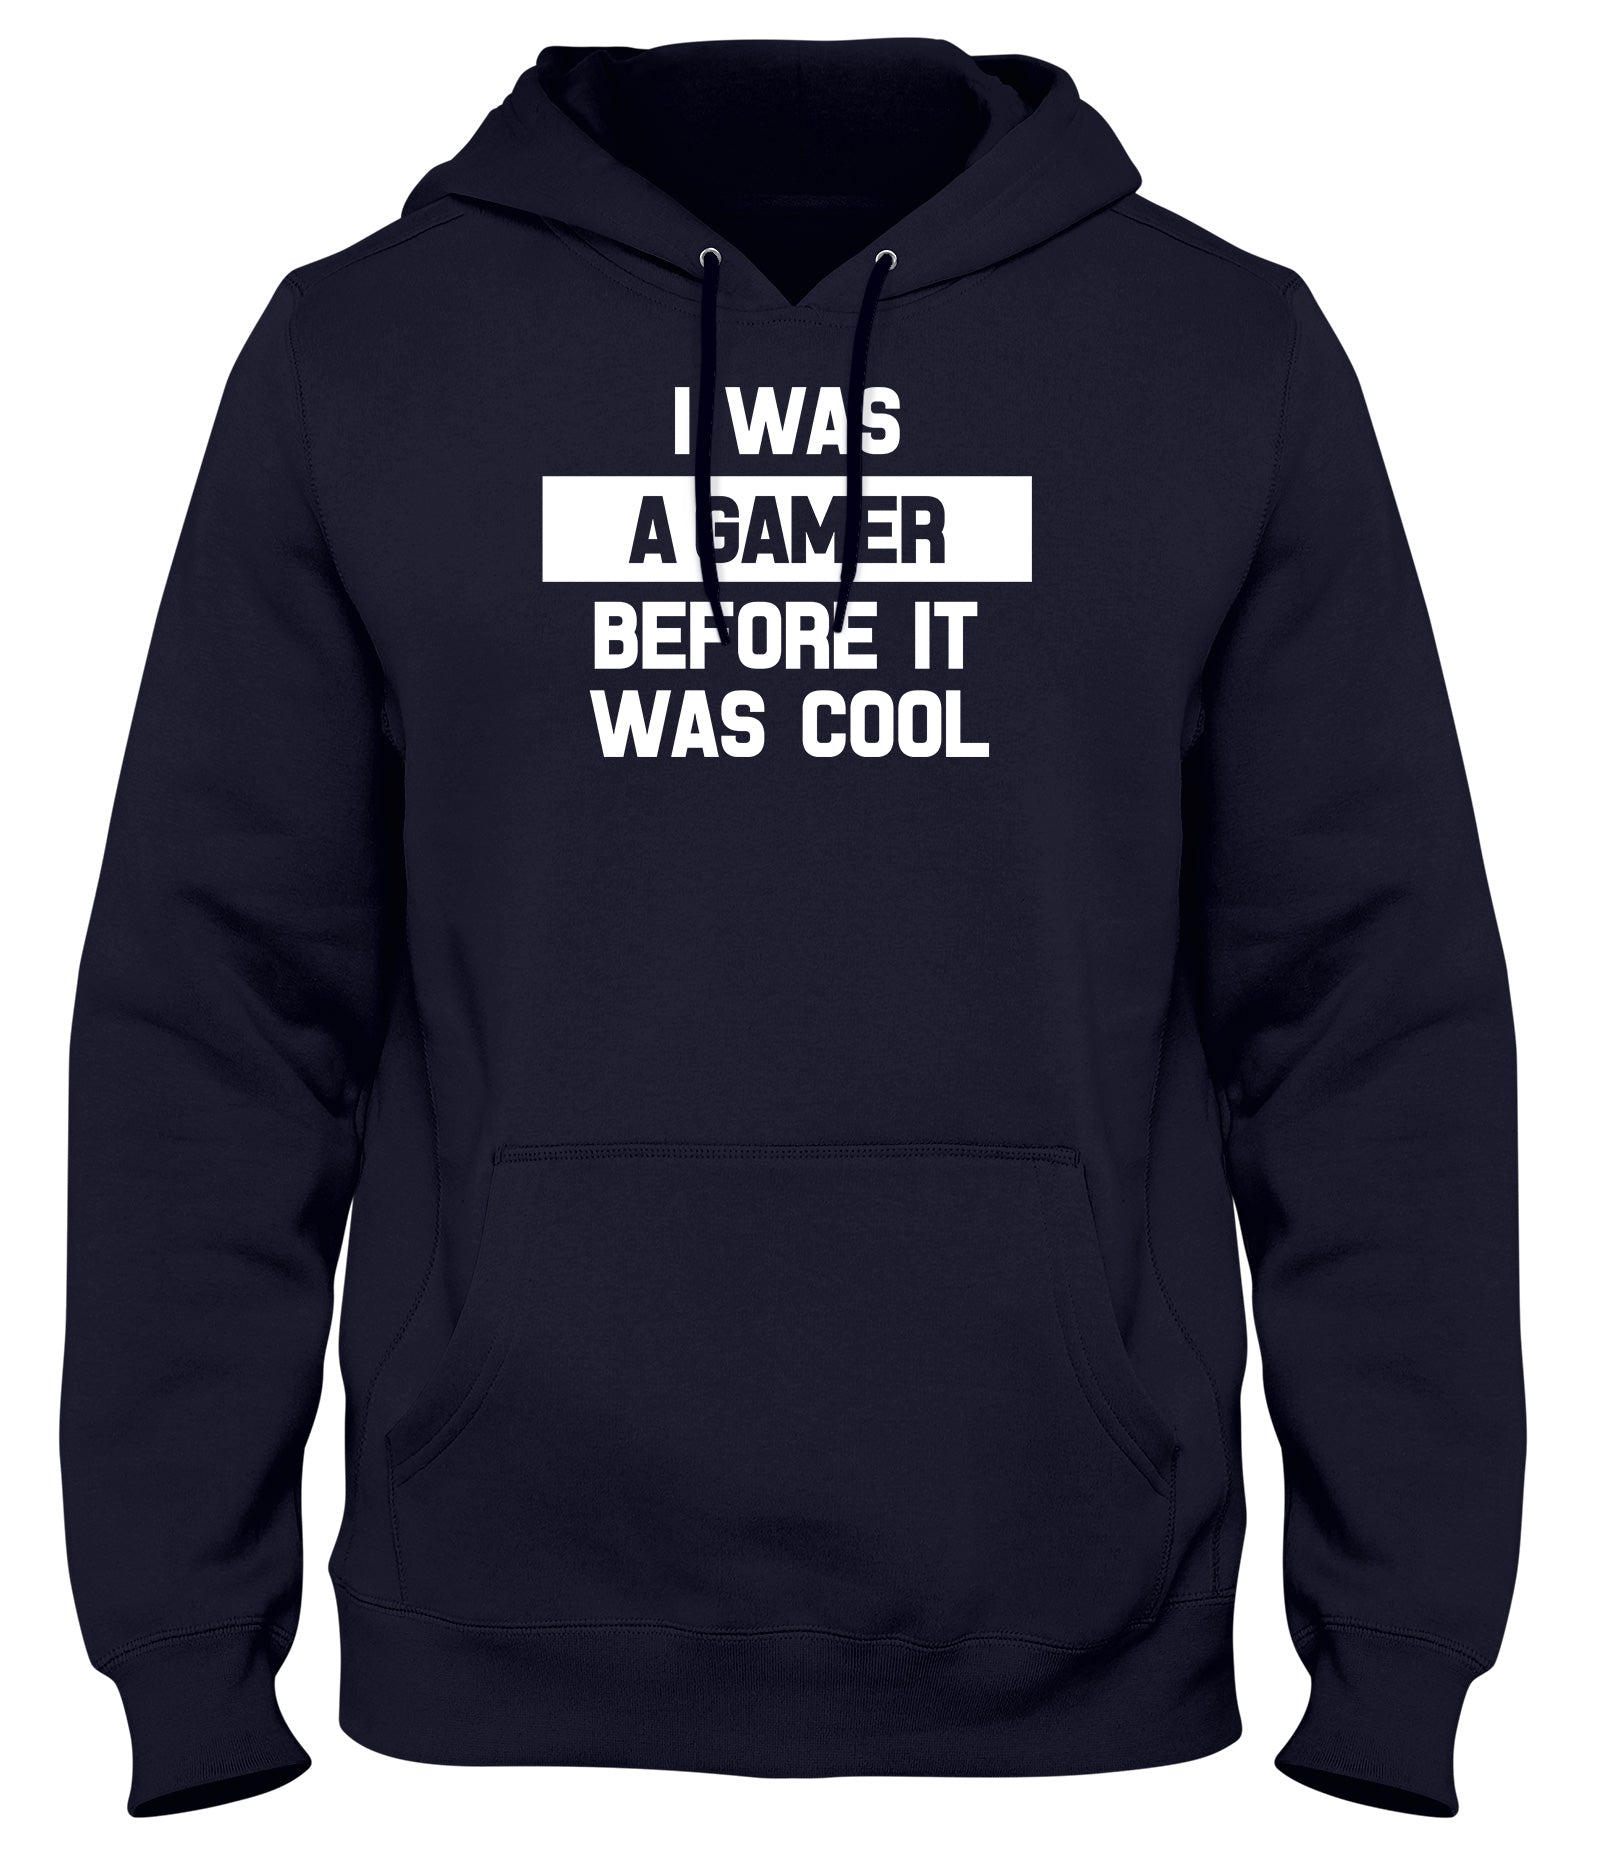 I WAS A GAMER BEFORE IT WAS COOL WOMENS LADIES MENS UNISEX HOODIE